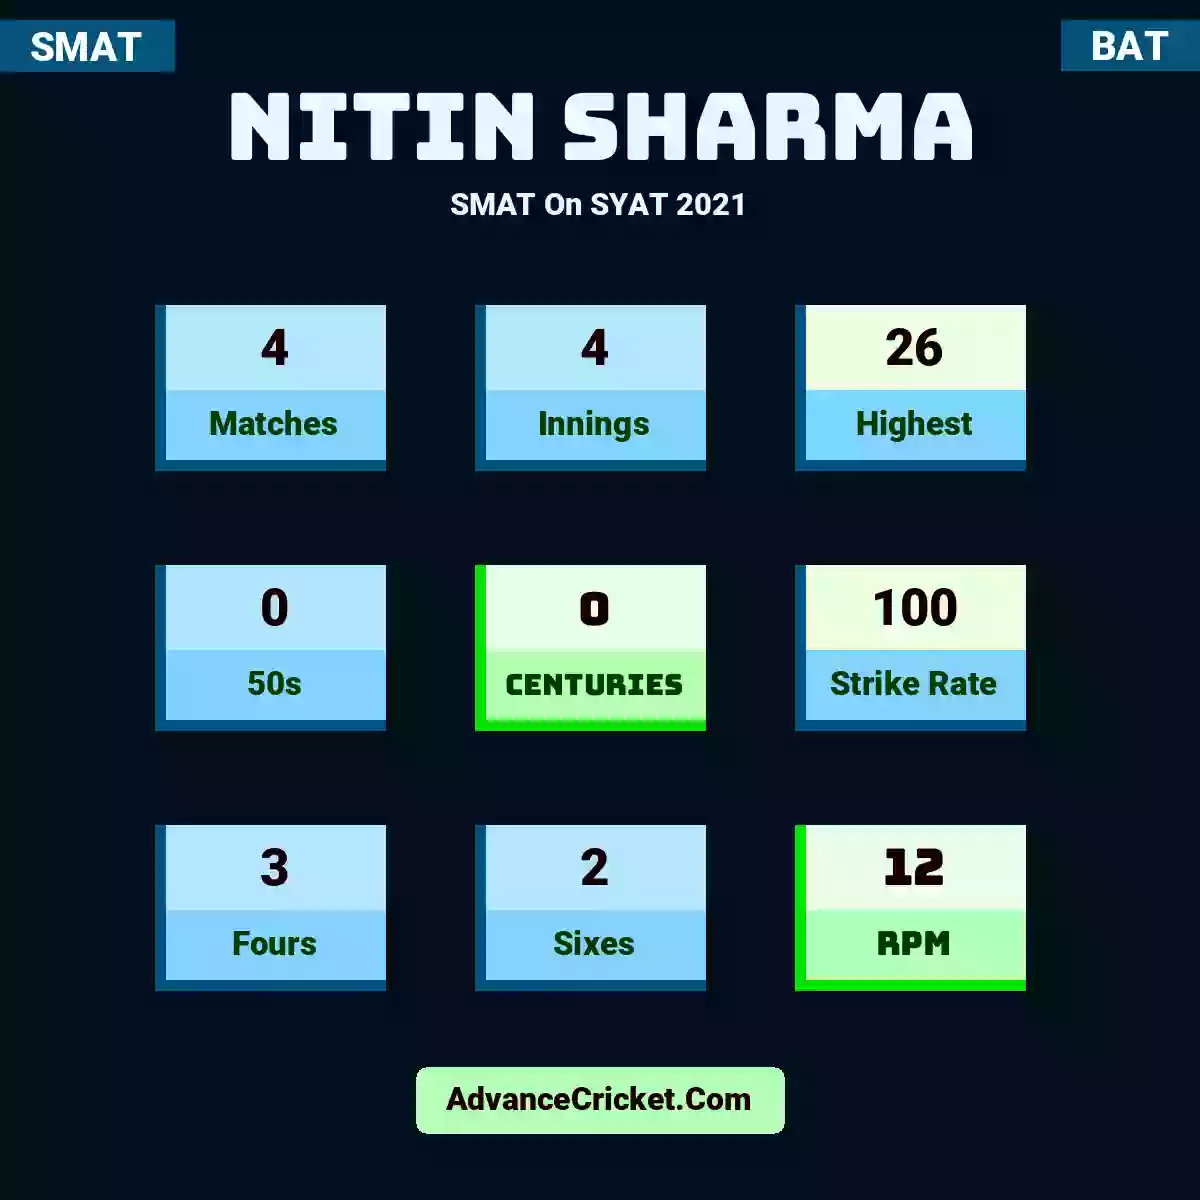 Nitin Sharma SMAT  On SYAT 2021, Nitin Sharma played 4 matches, scored 26 runs as highest, 0 half-centuries, and 0 centuries, with a strike rate of 100. N.Sharma hit 3 fours and 2 sixes, with an RPM of 12.